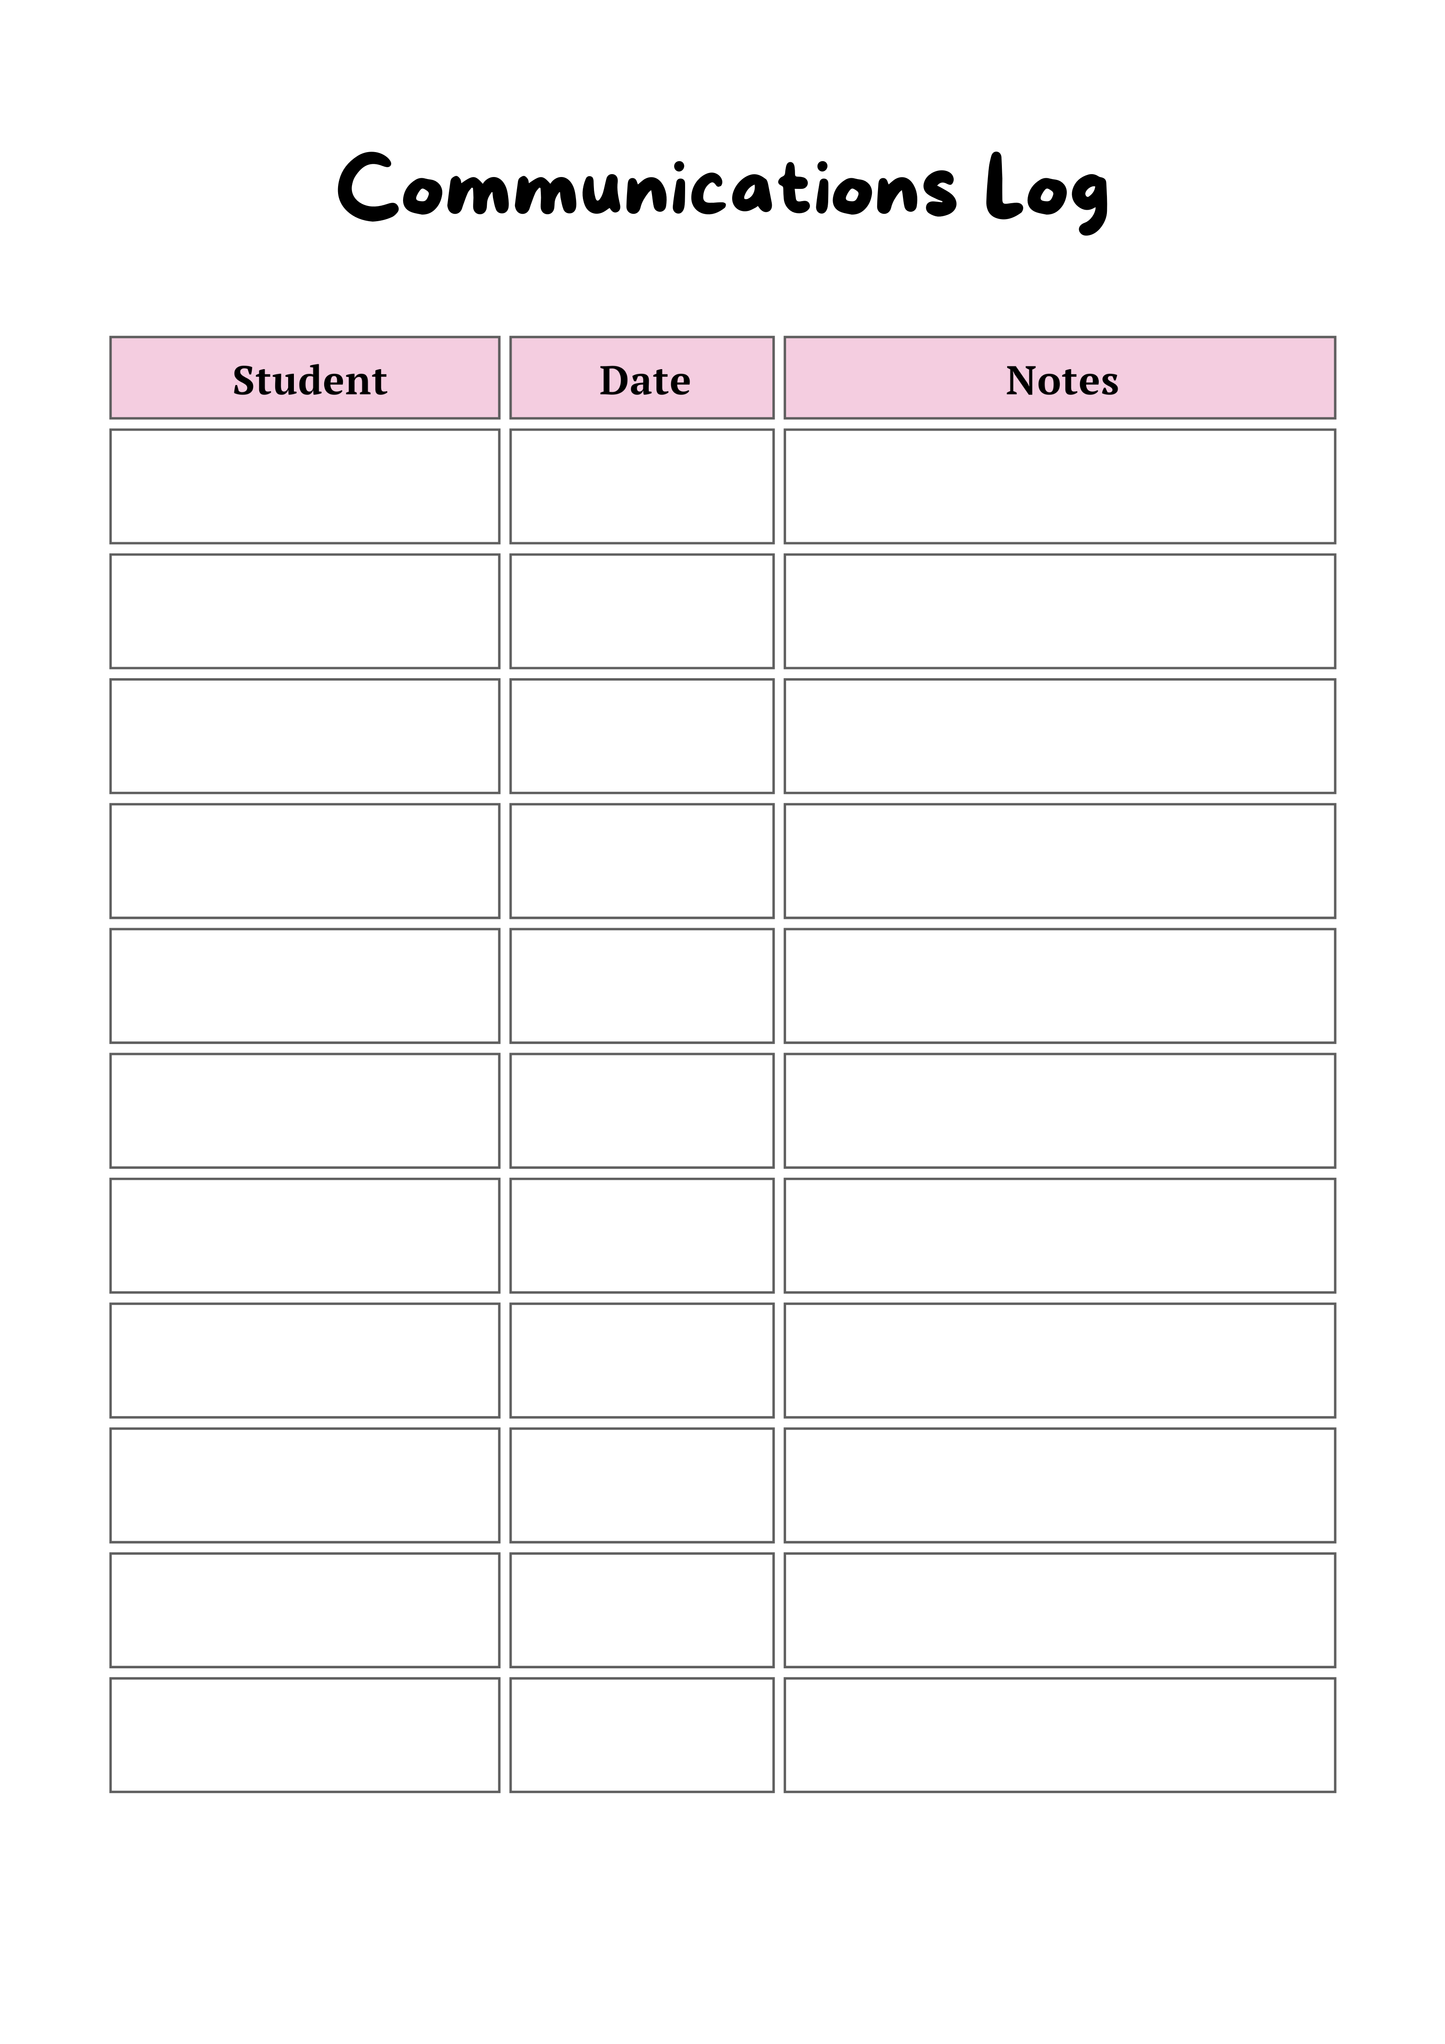 Yellow Flowers with Pink Background Teacher Planner